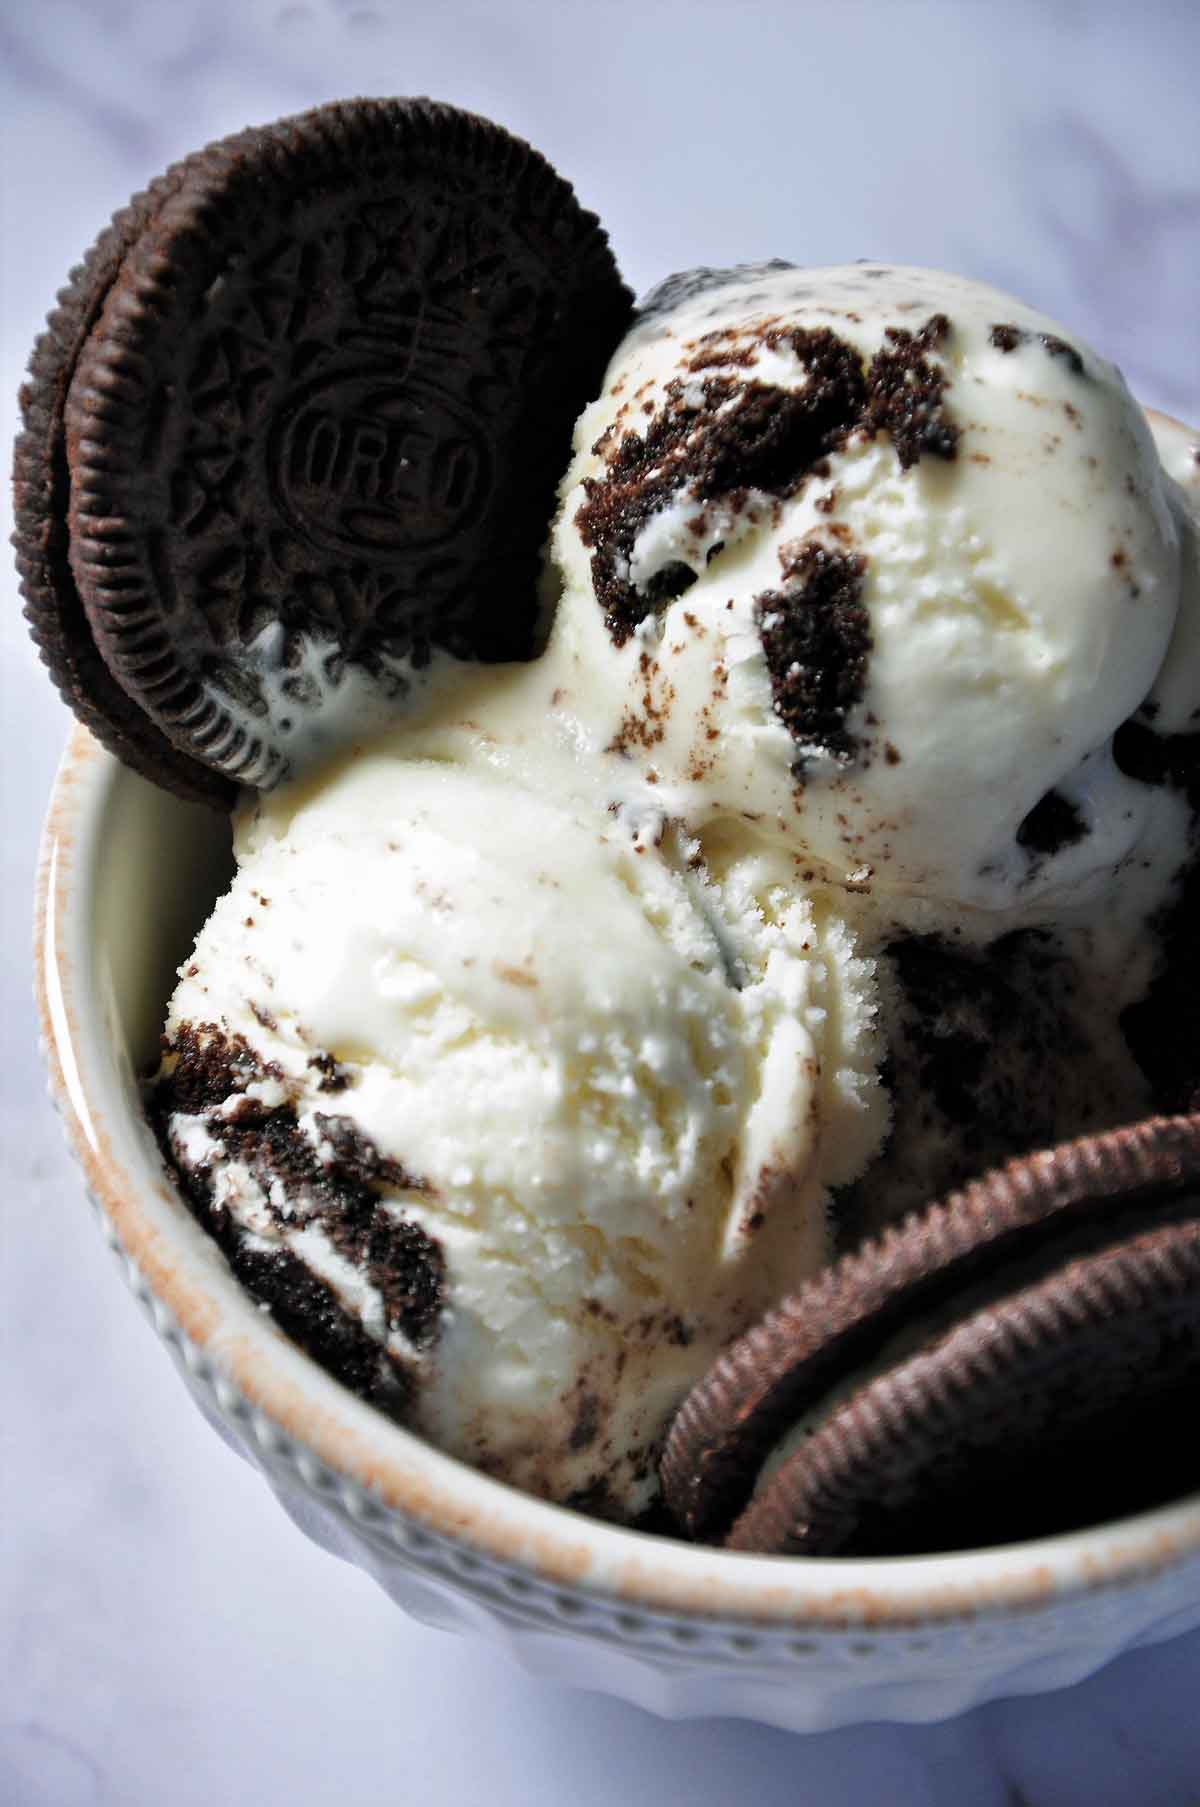 Two scoops of Oreo ice cream with 2 oreo cookies in a bowl.